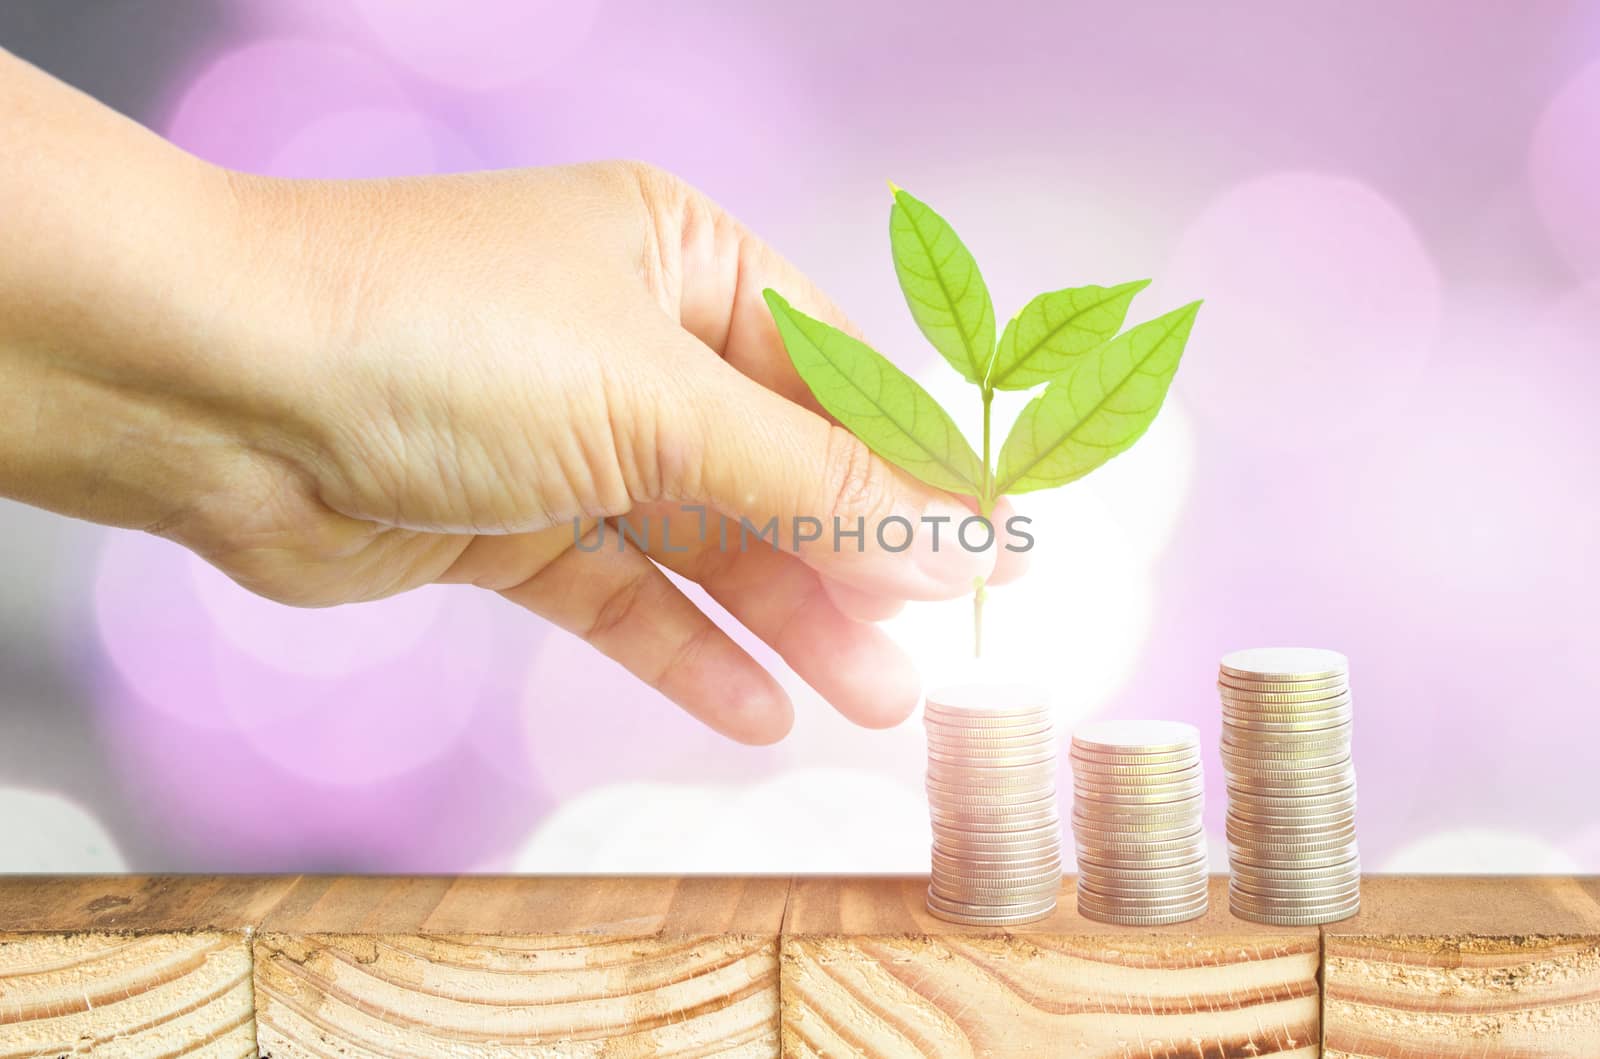 Close-Up Of Female Hand Pick Up The Leaf On The Coin With Bokeh Soft Light Blur Background ,Business Finance And Money Concept, Business Investment Growth Concept by rakoptonLPN